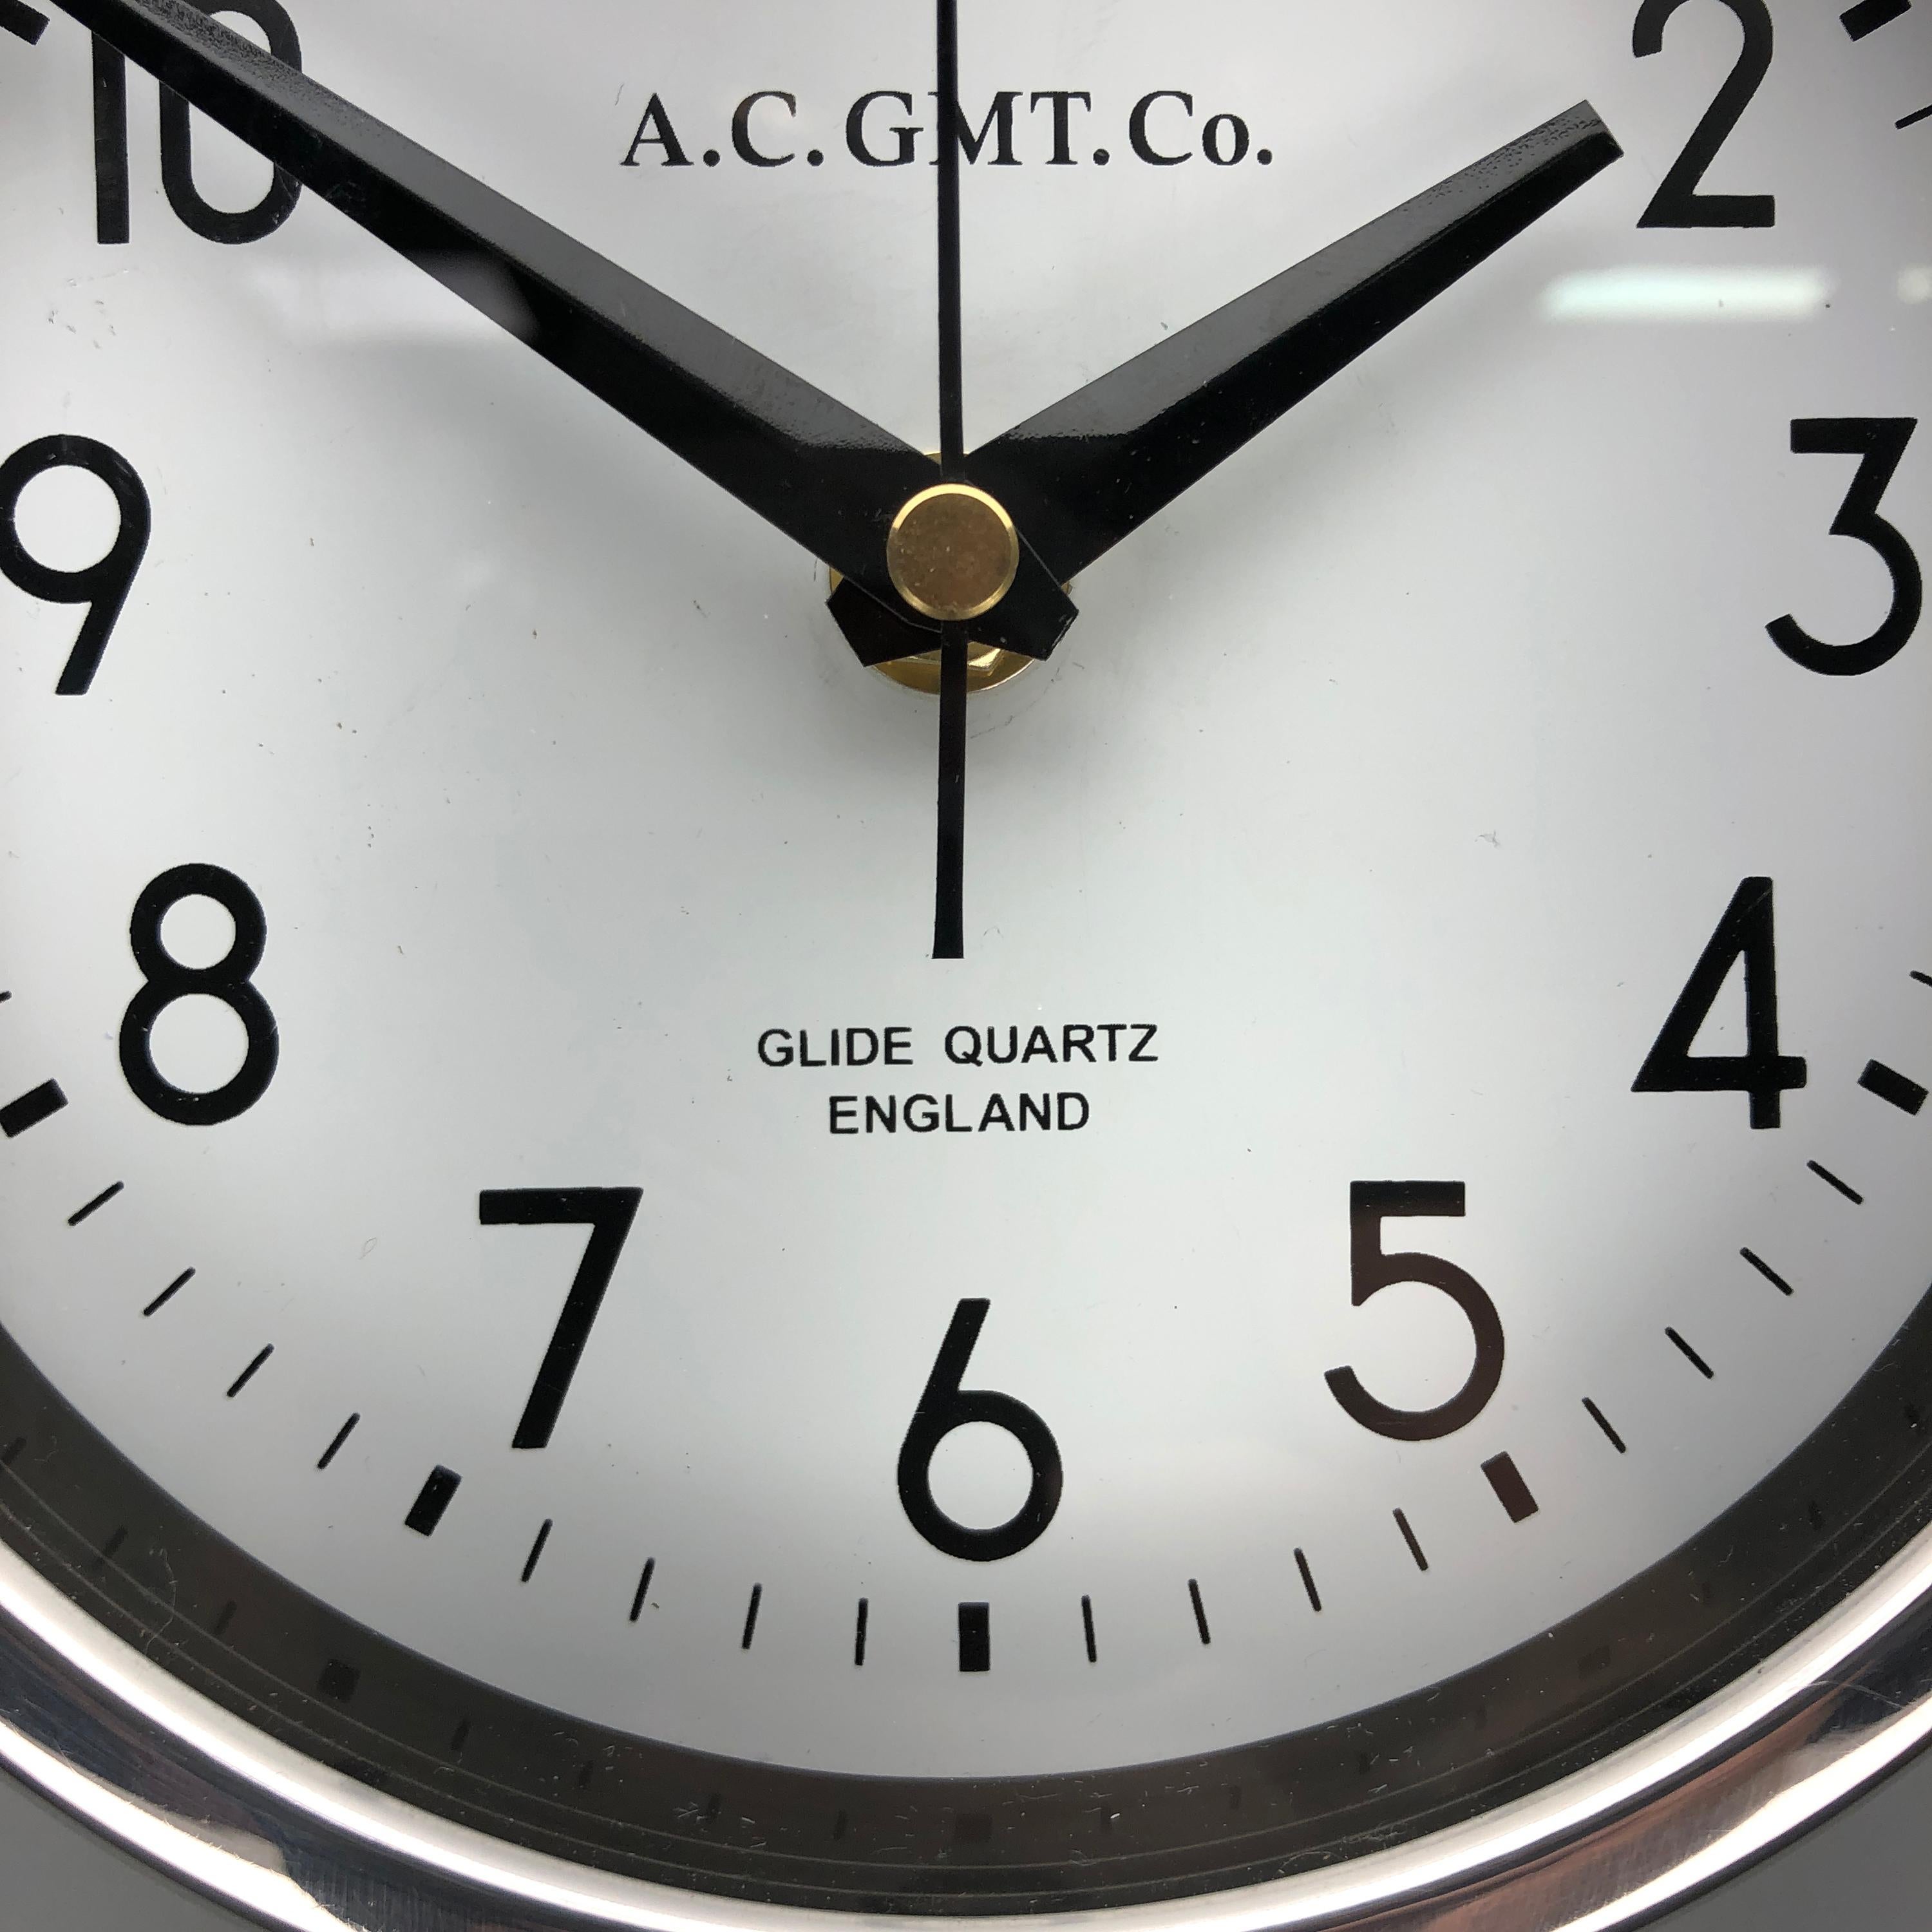 Late 20th Century 1970s British Bronze and Chrome AC GMT Co. Industrial Wall Clock White Dial